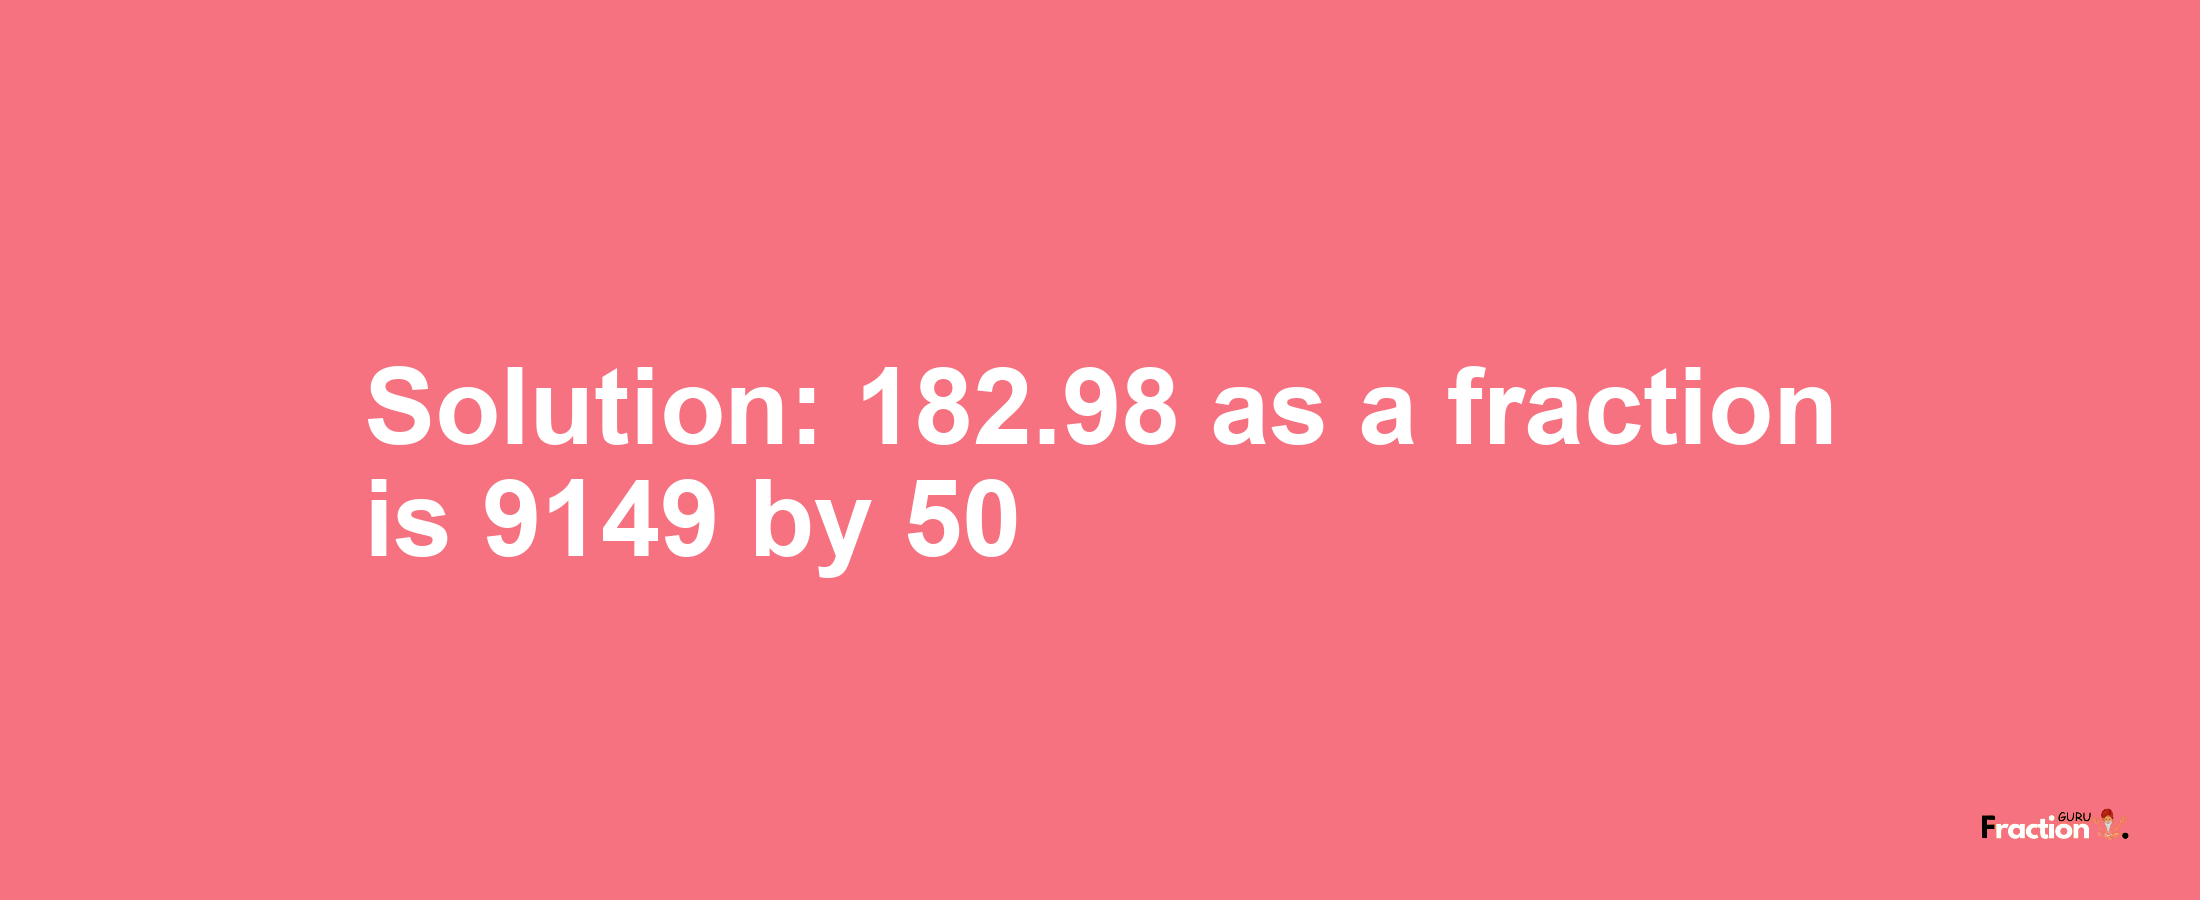 Solution:182.98 as a fraction is 9149/50